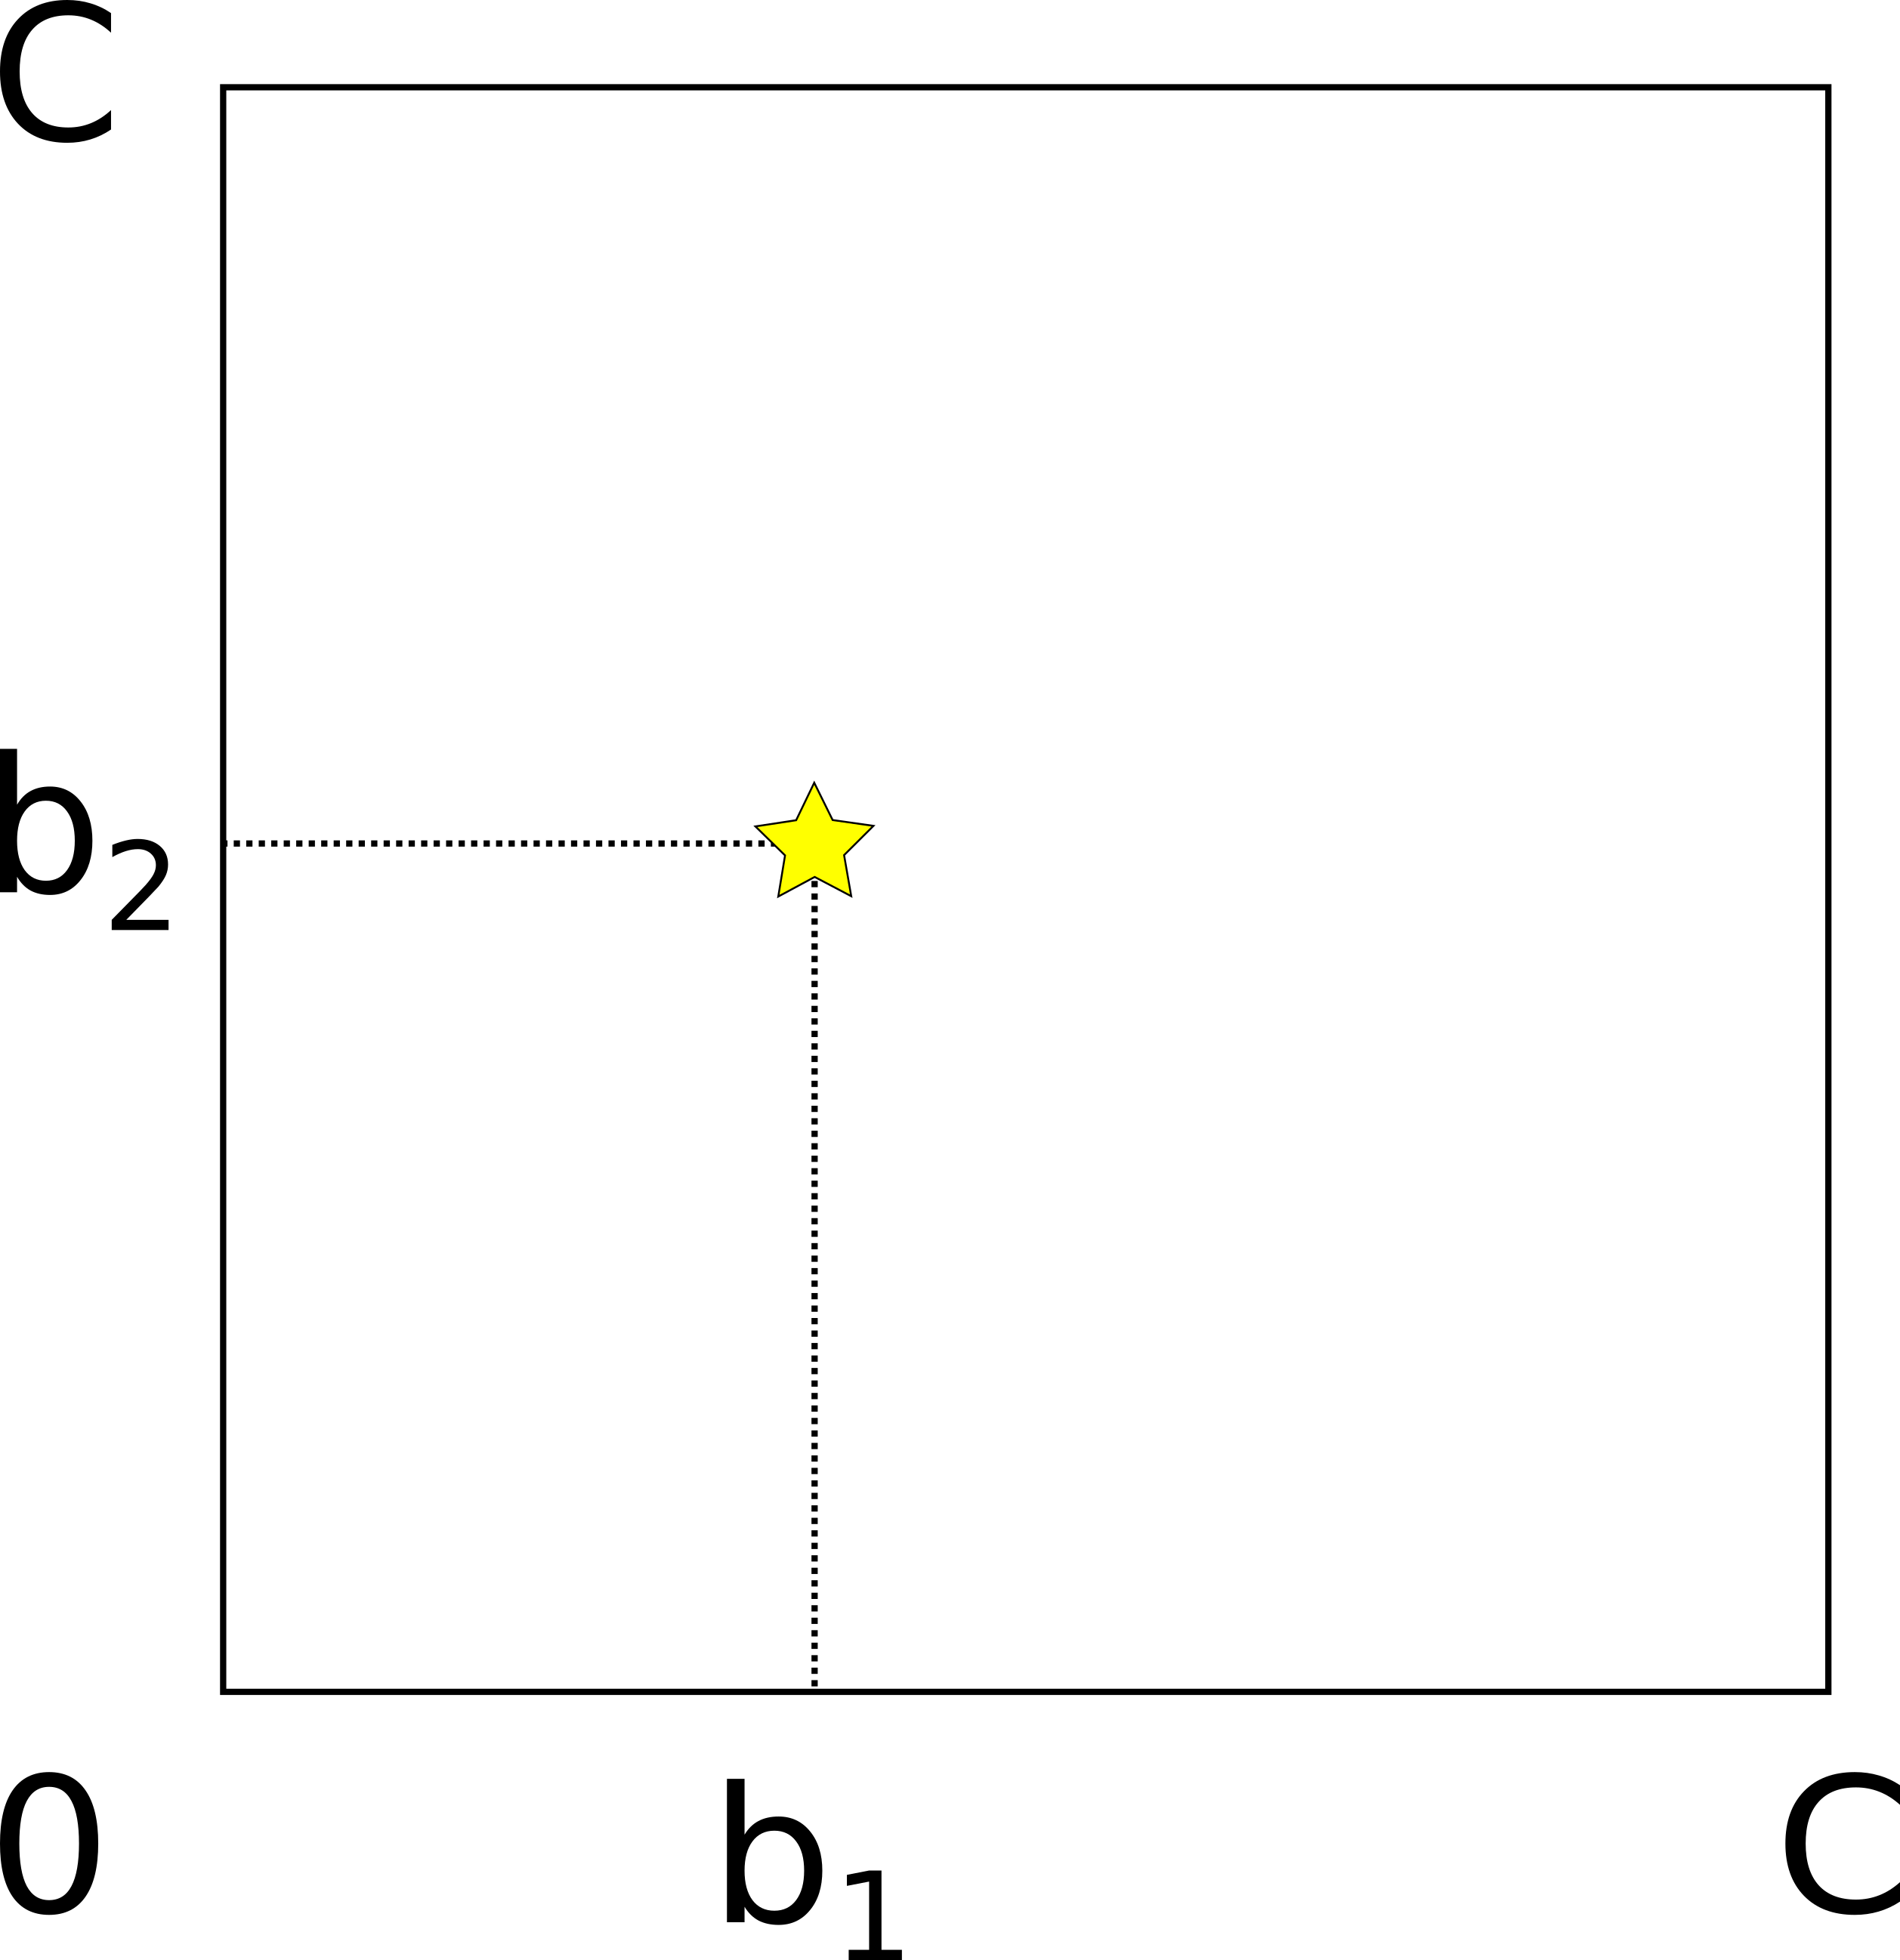 A geometrical representation of a two-channel hop.